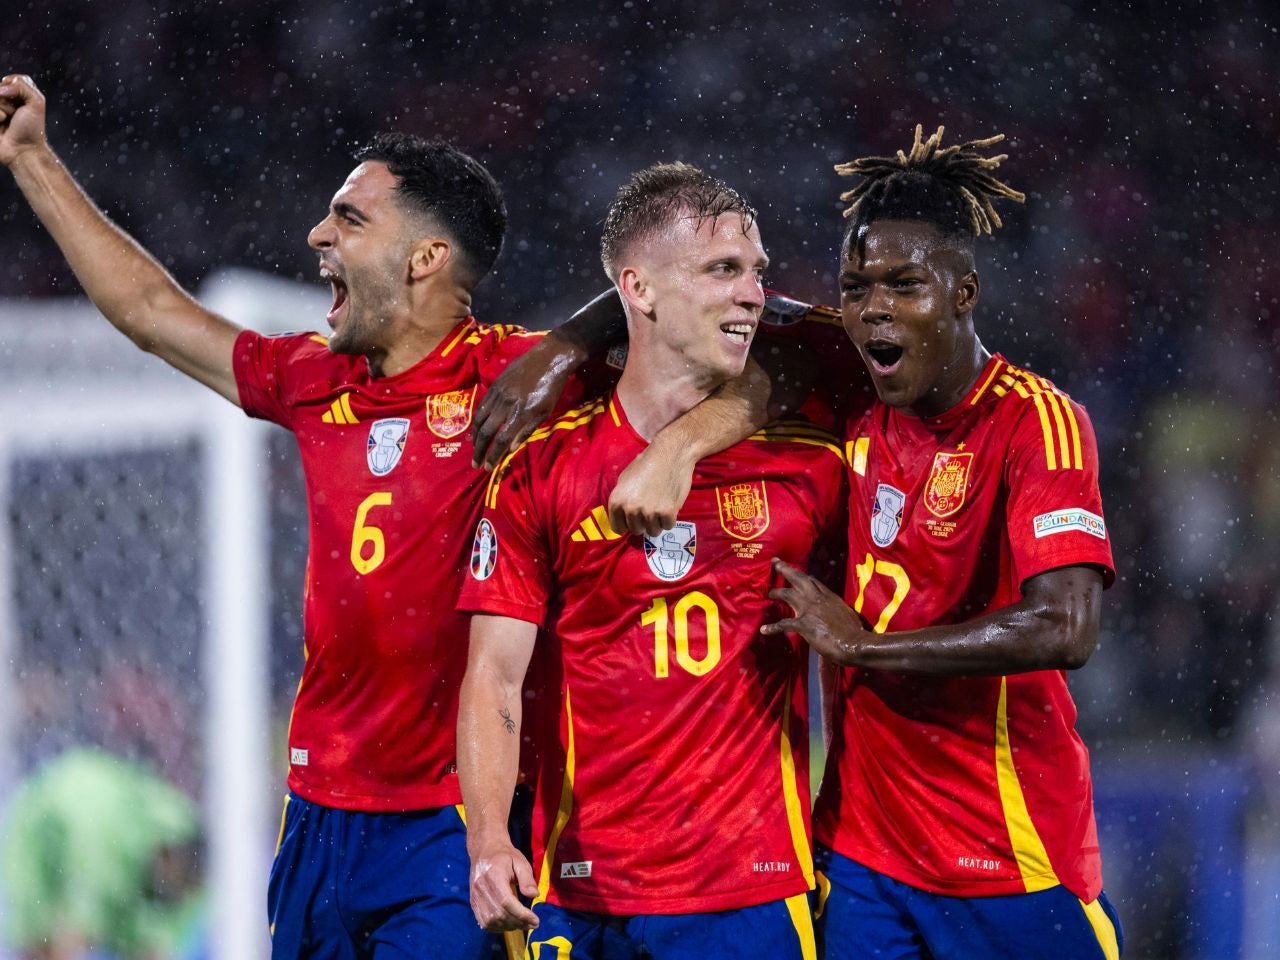 Arsenal transfer news: Gunners 'want' Spain star as Smith Rowe replacement